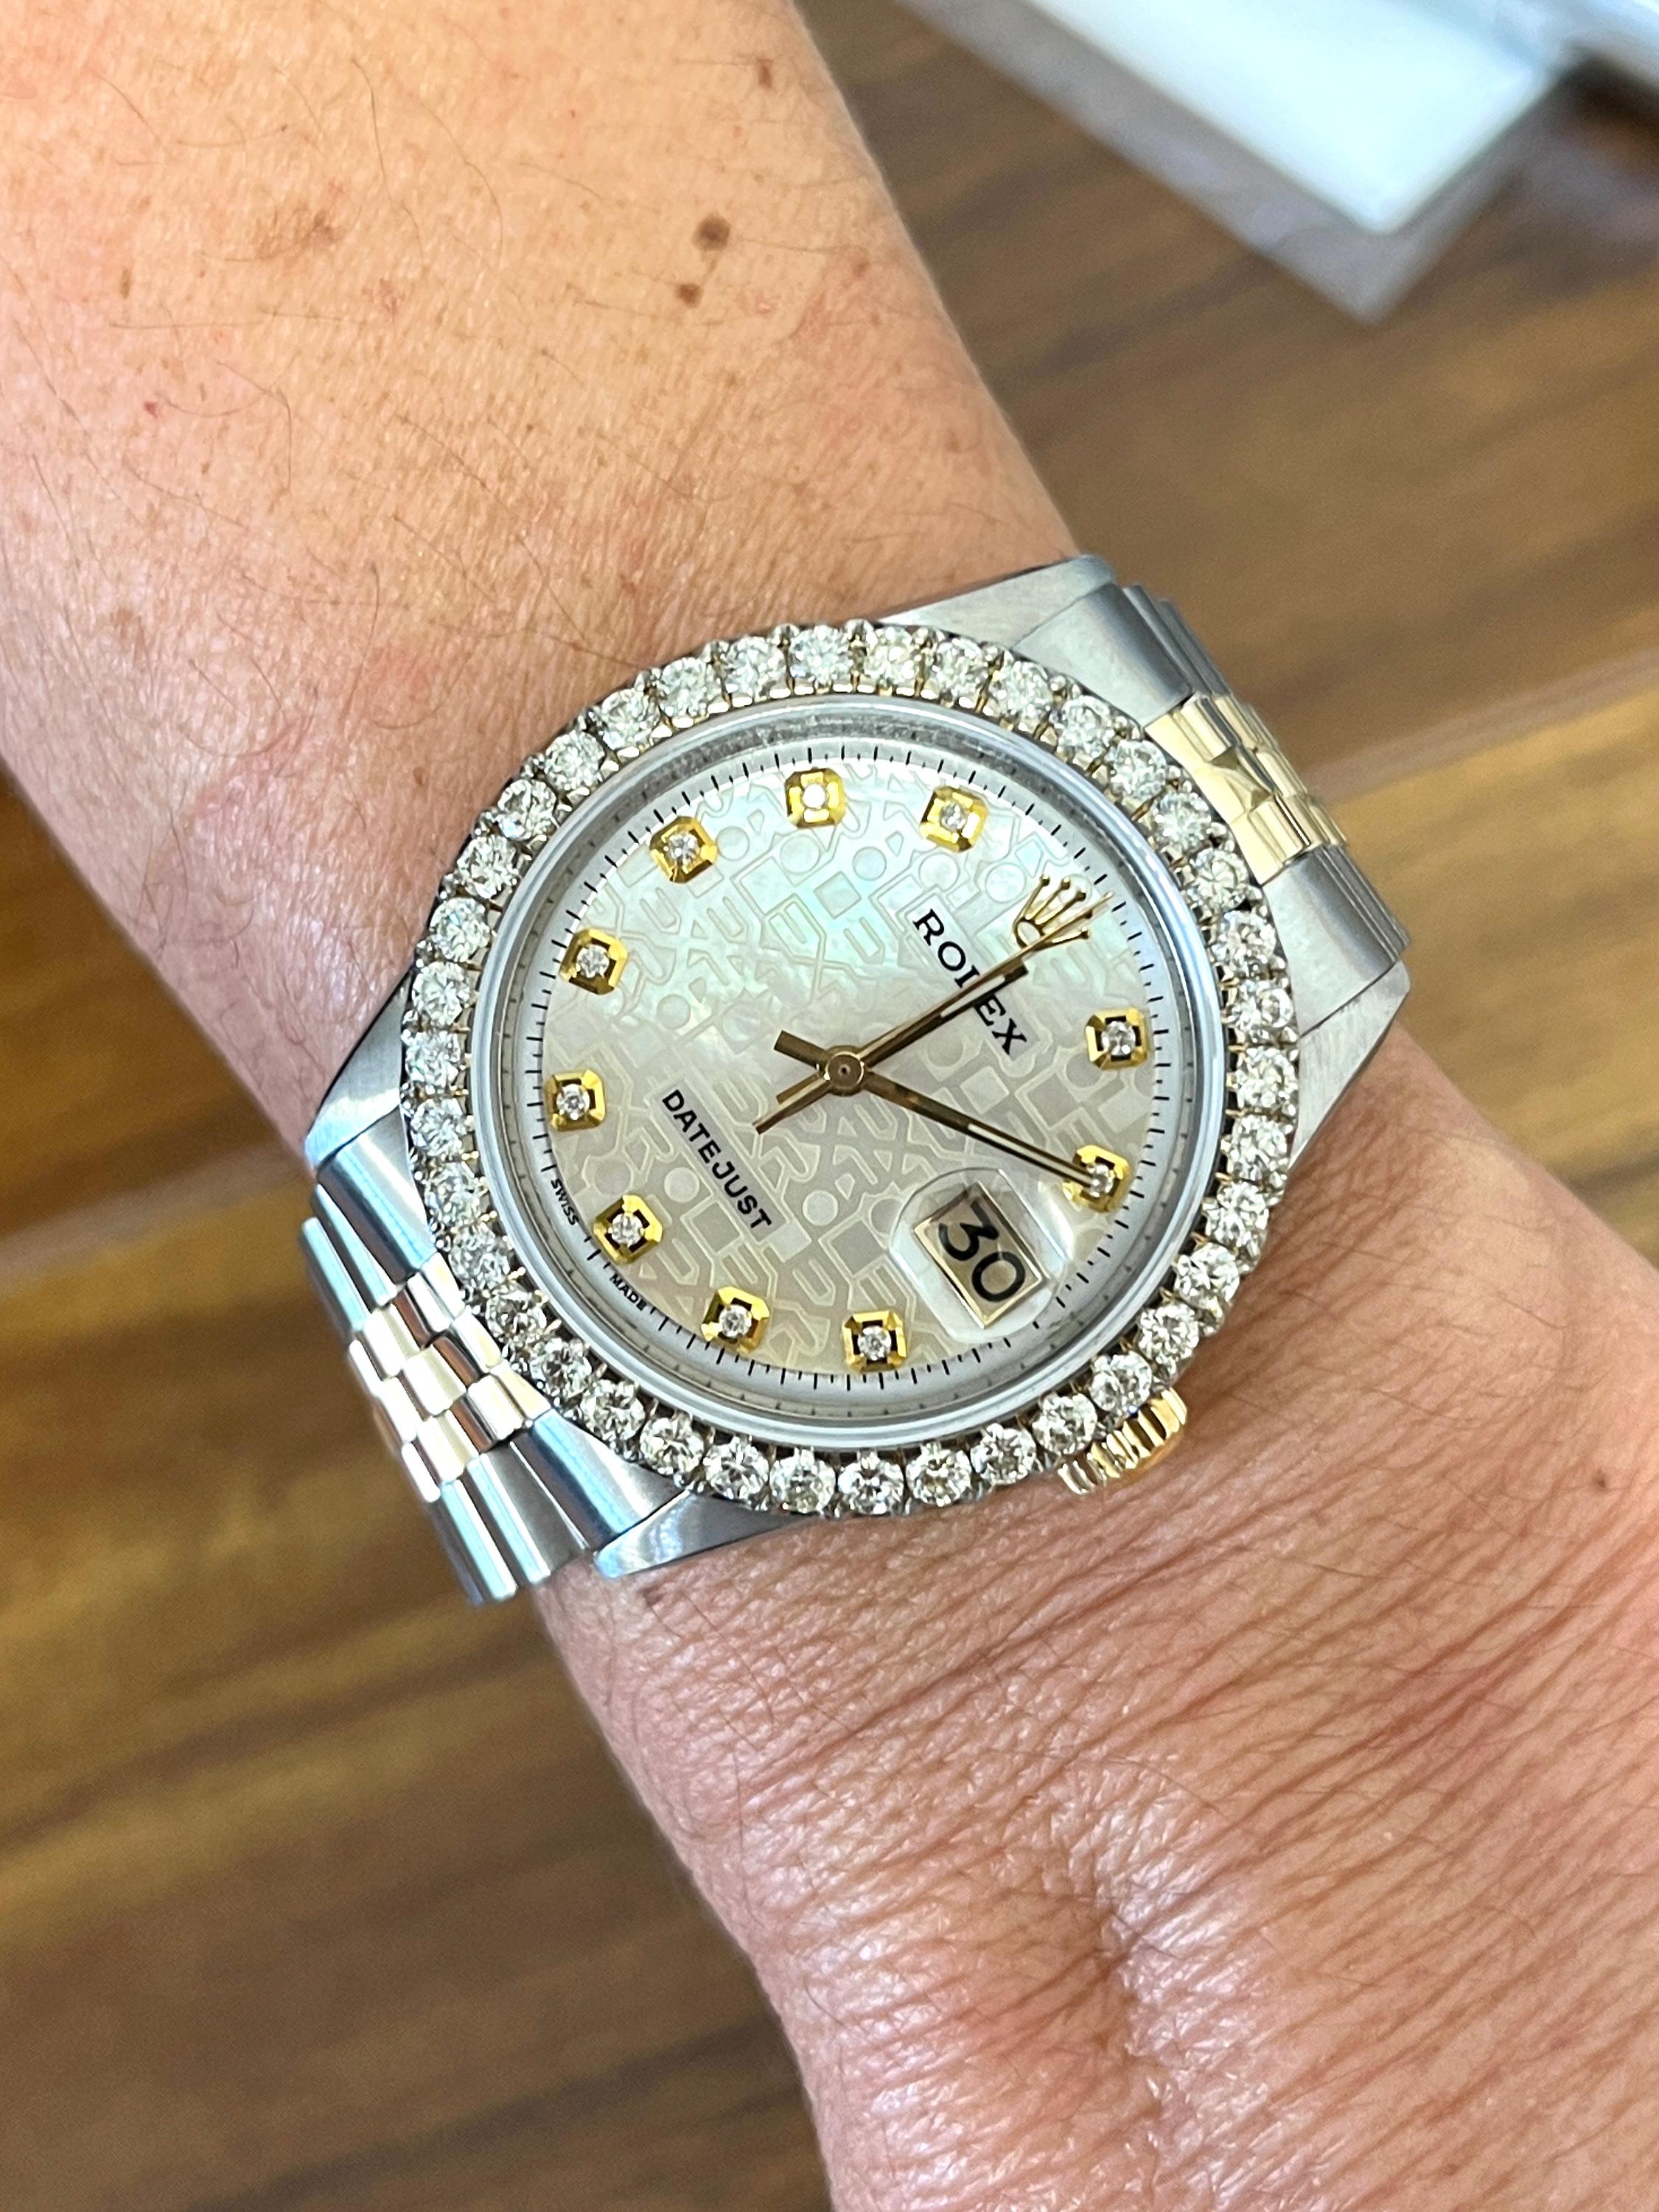 Rolex 2-Tone Date Just White Jubilee Dial Ref. 1601 With Diamond Bezel In Excellent Condition For Sale In Miami, FL